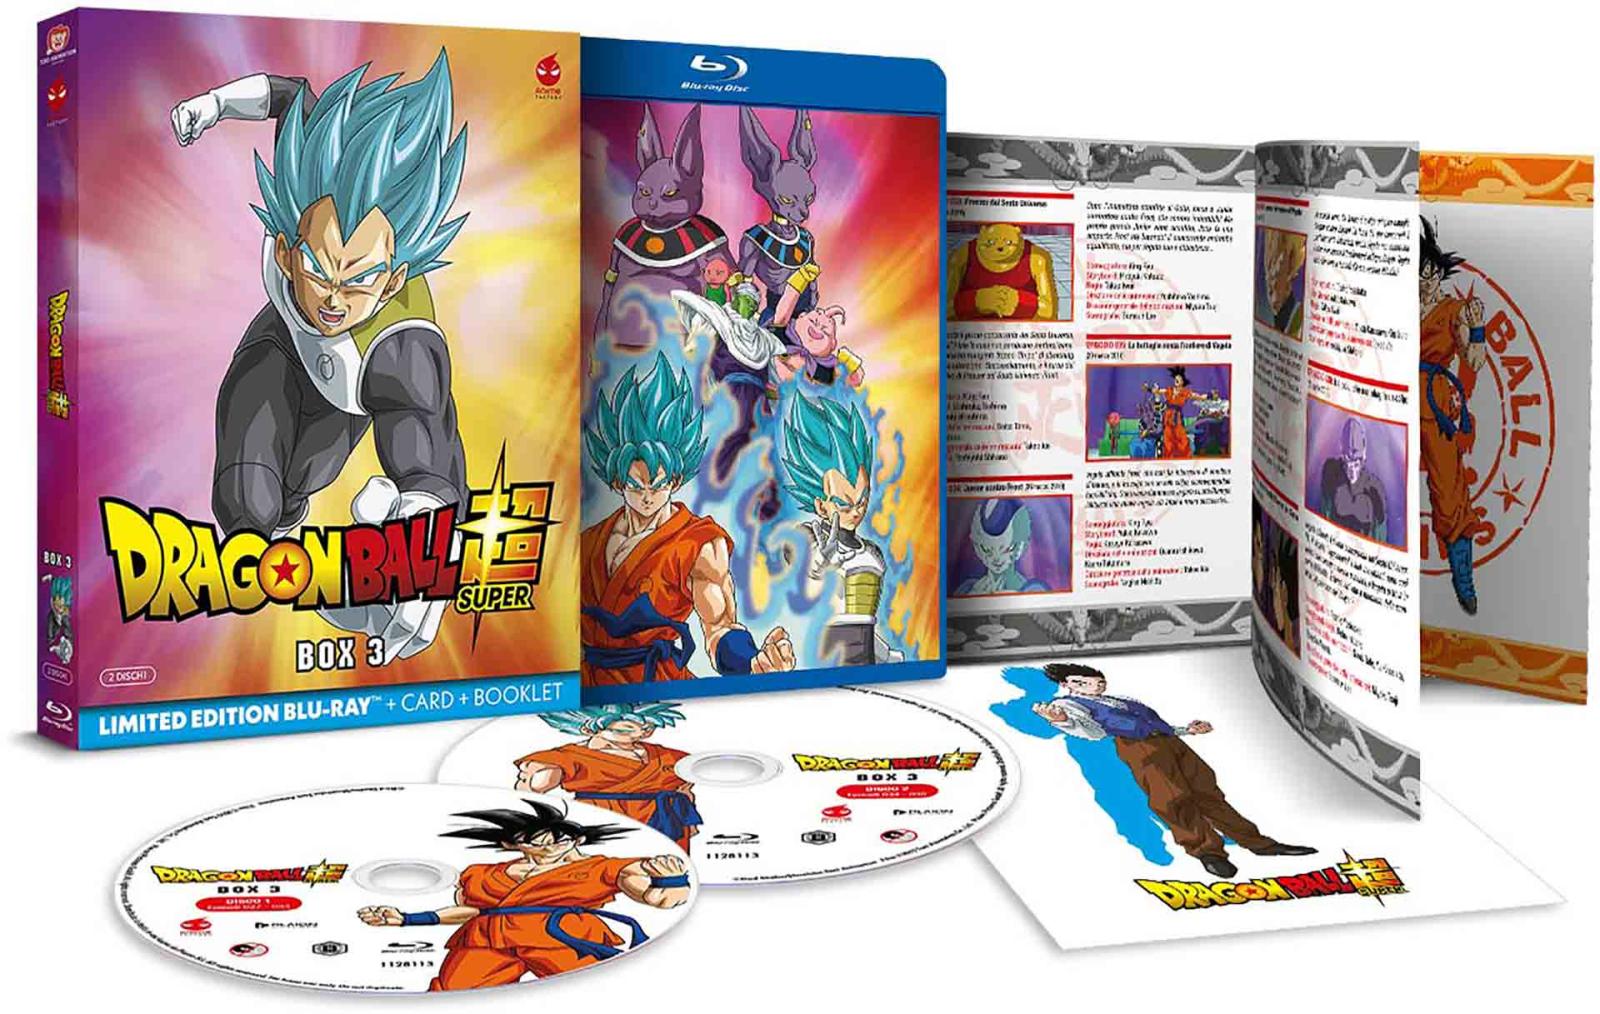 Dragon Ball Super - Volume 3 - Limited Edition 2 Blu-ray + Card + Booklet (Blu-ray) Image 2